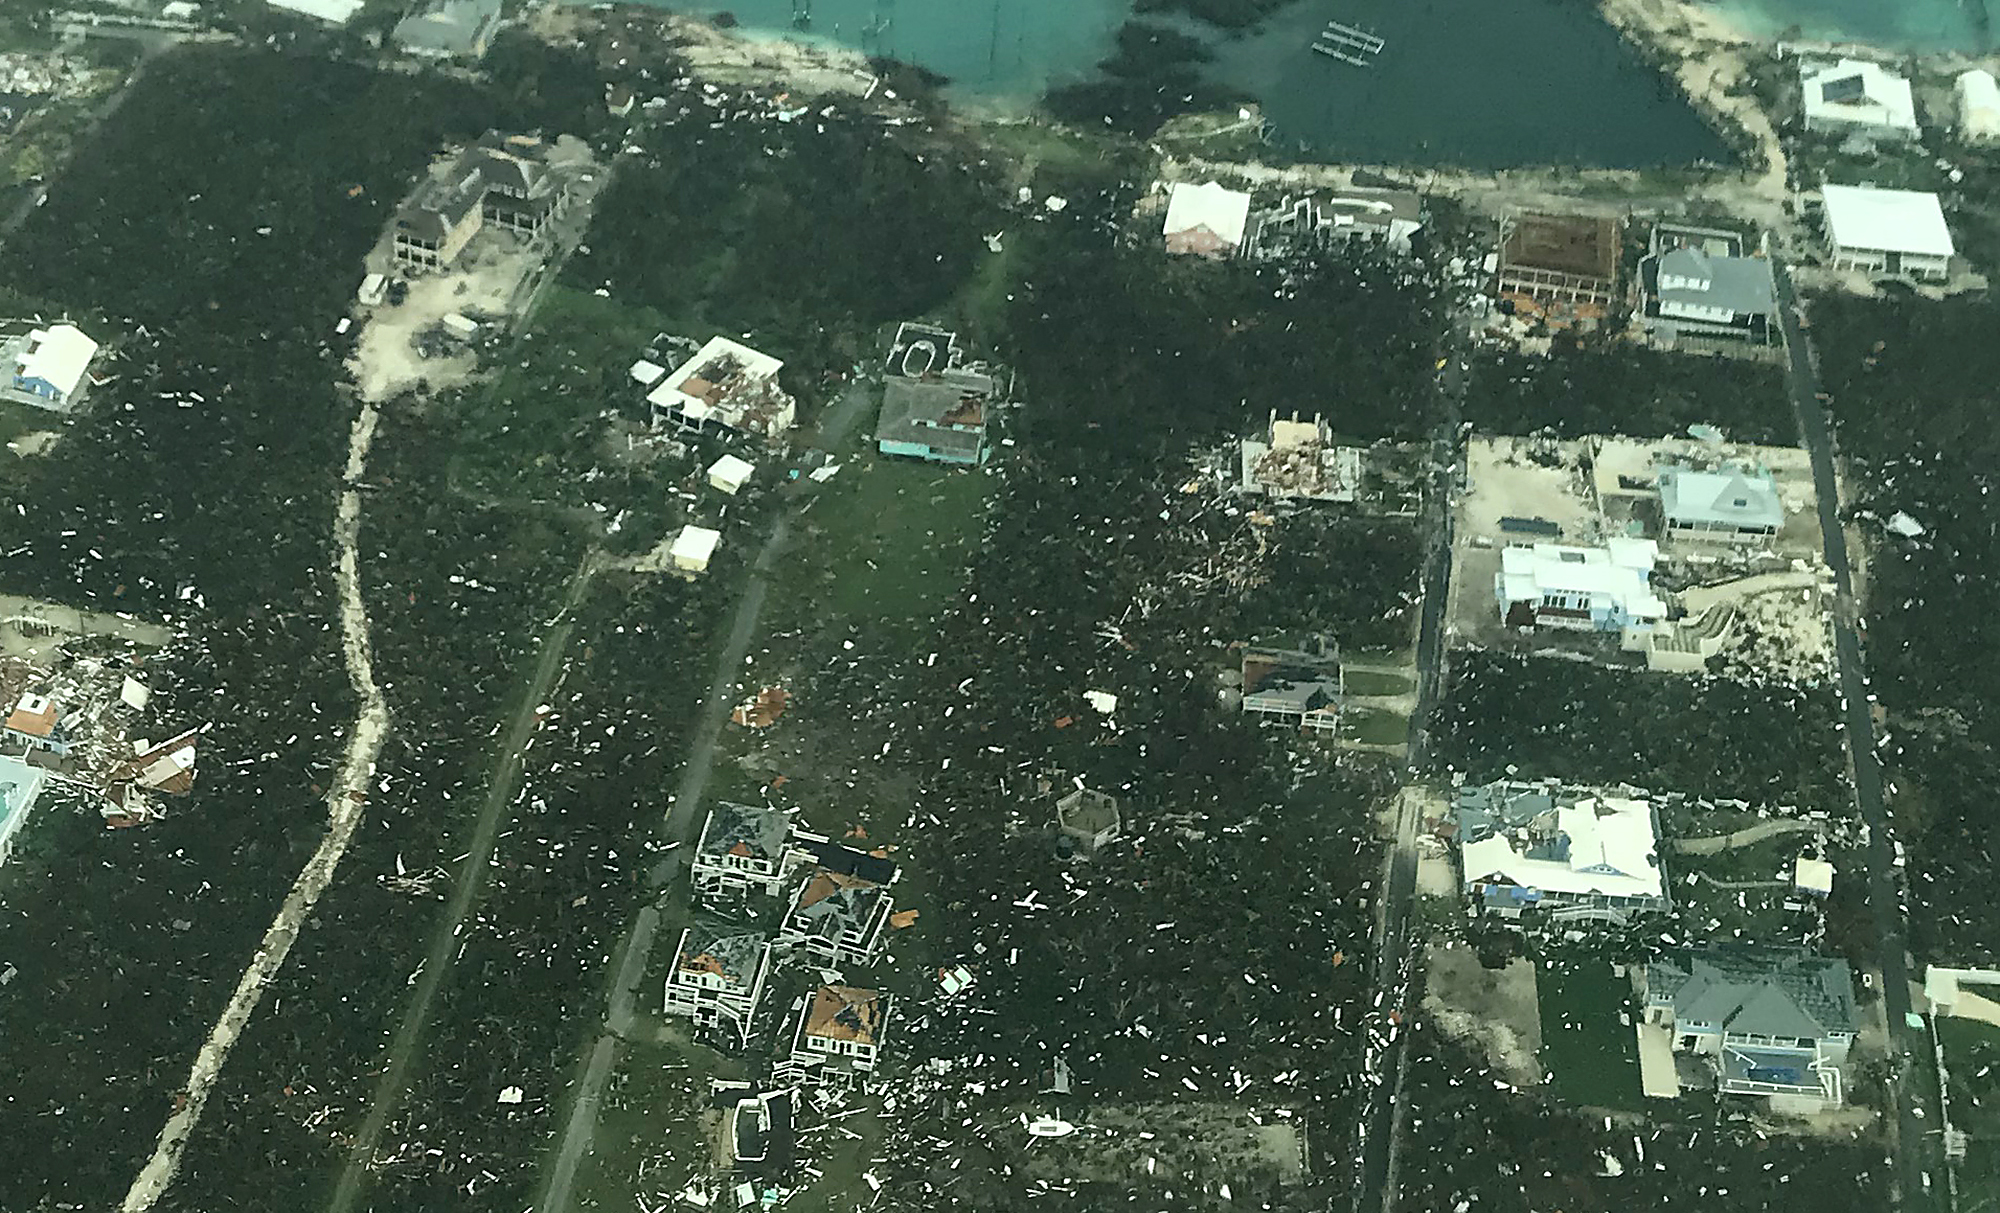 In this handout aerial photo provided by the Head Knowles Foundation, damage is seen from Hurricane Dorian on Abaco Island on September 3, 2019 in the Bahamas. (Handout—Getty Images)